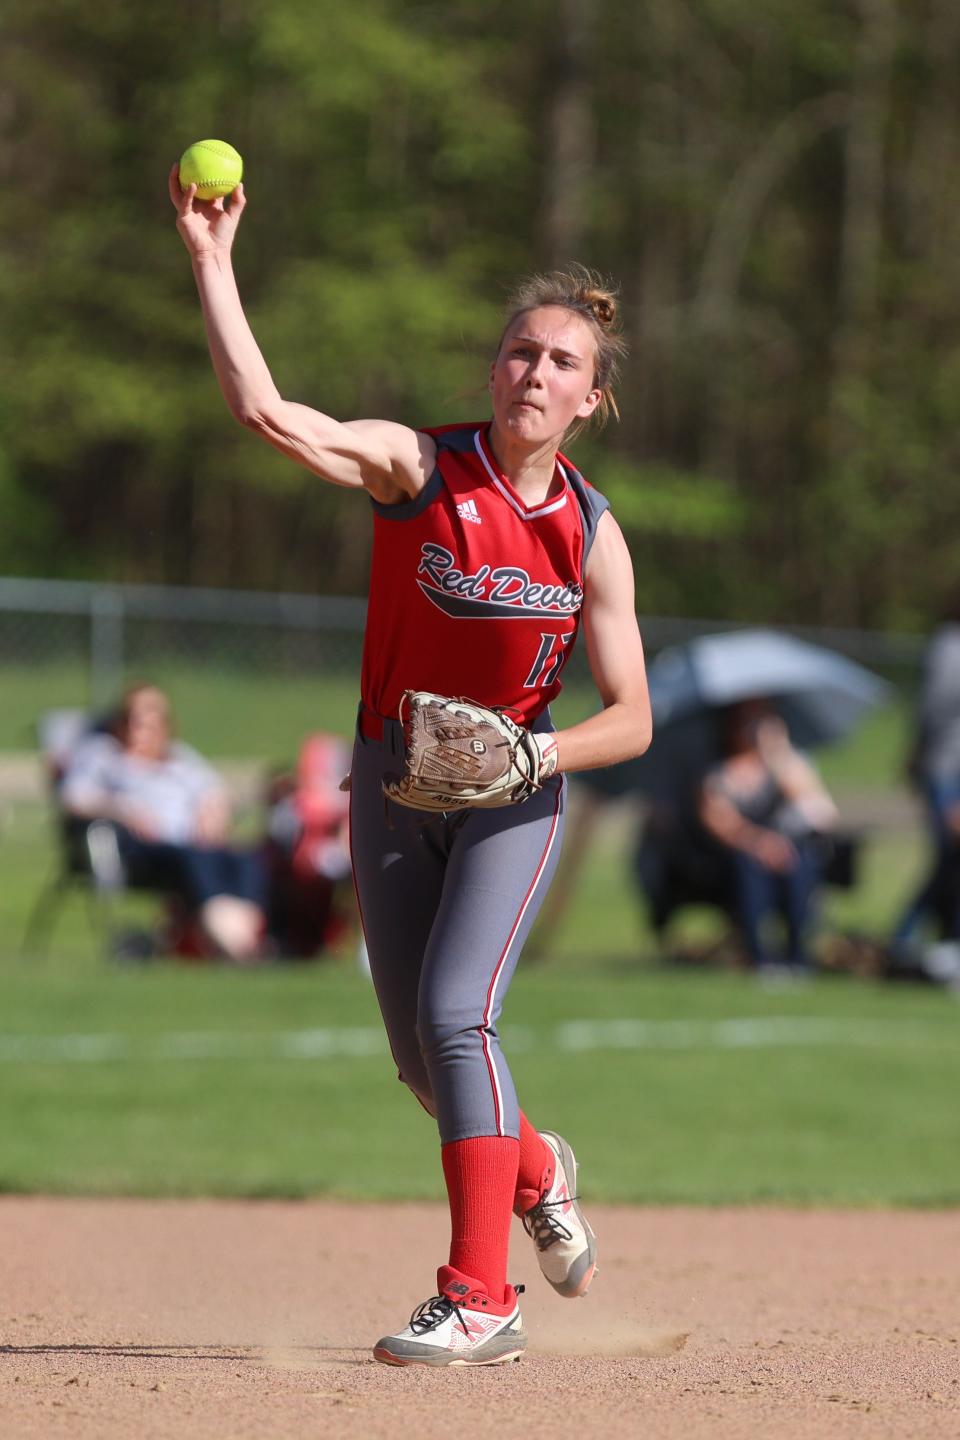 Crestwood junior shortstop Aimee Barnauskas makes a throw to first base during Tuesday’s first round playoff game against Gilmore Academy at Crestwood High School.